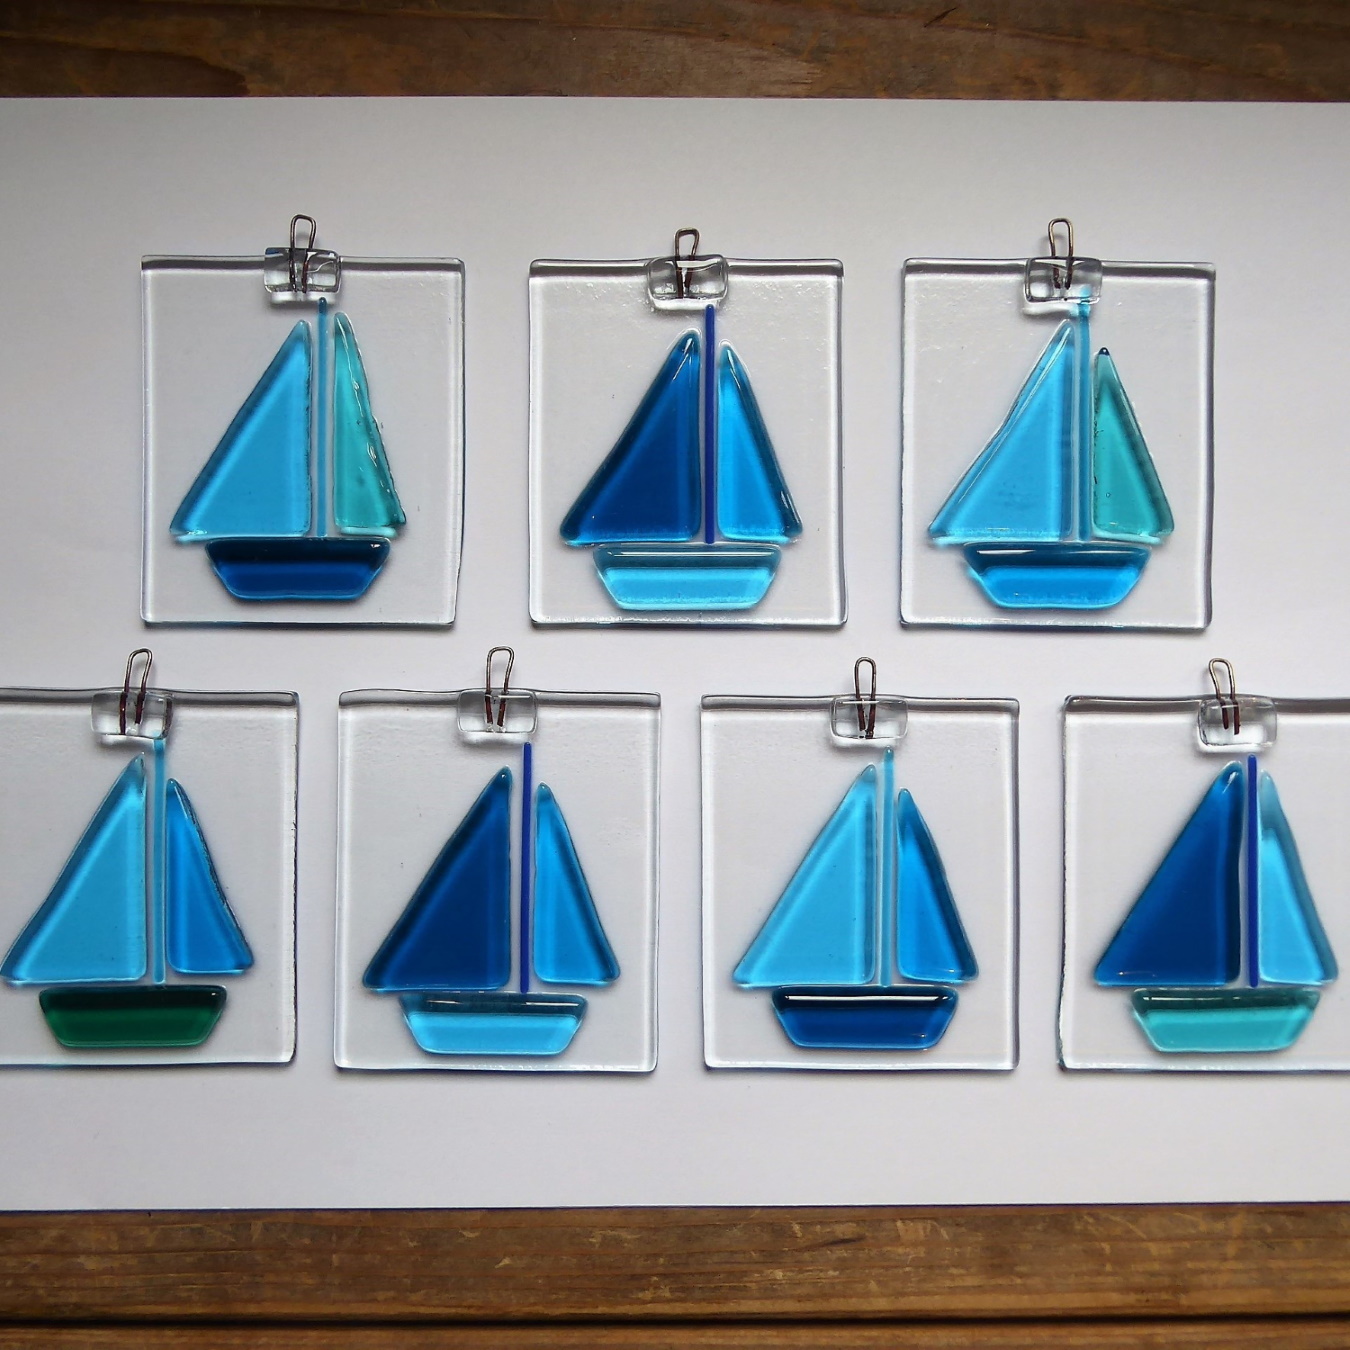 Hanging boats - great for bathrooms!